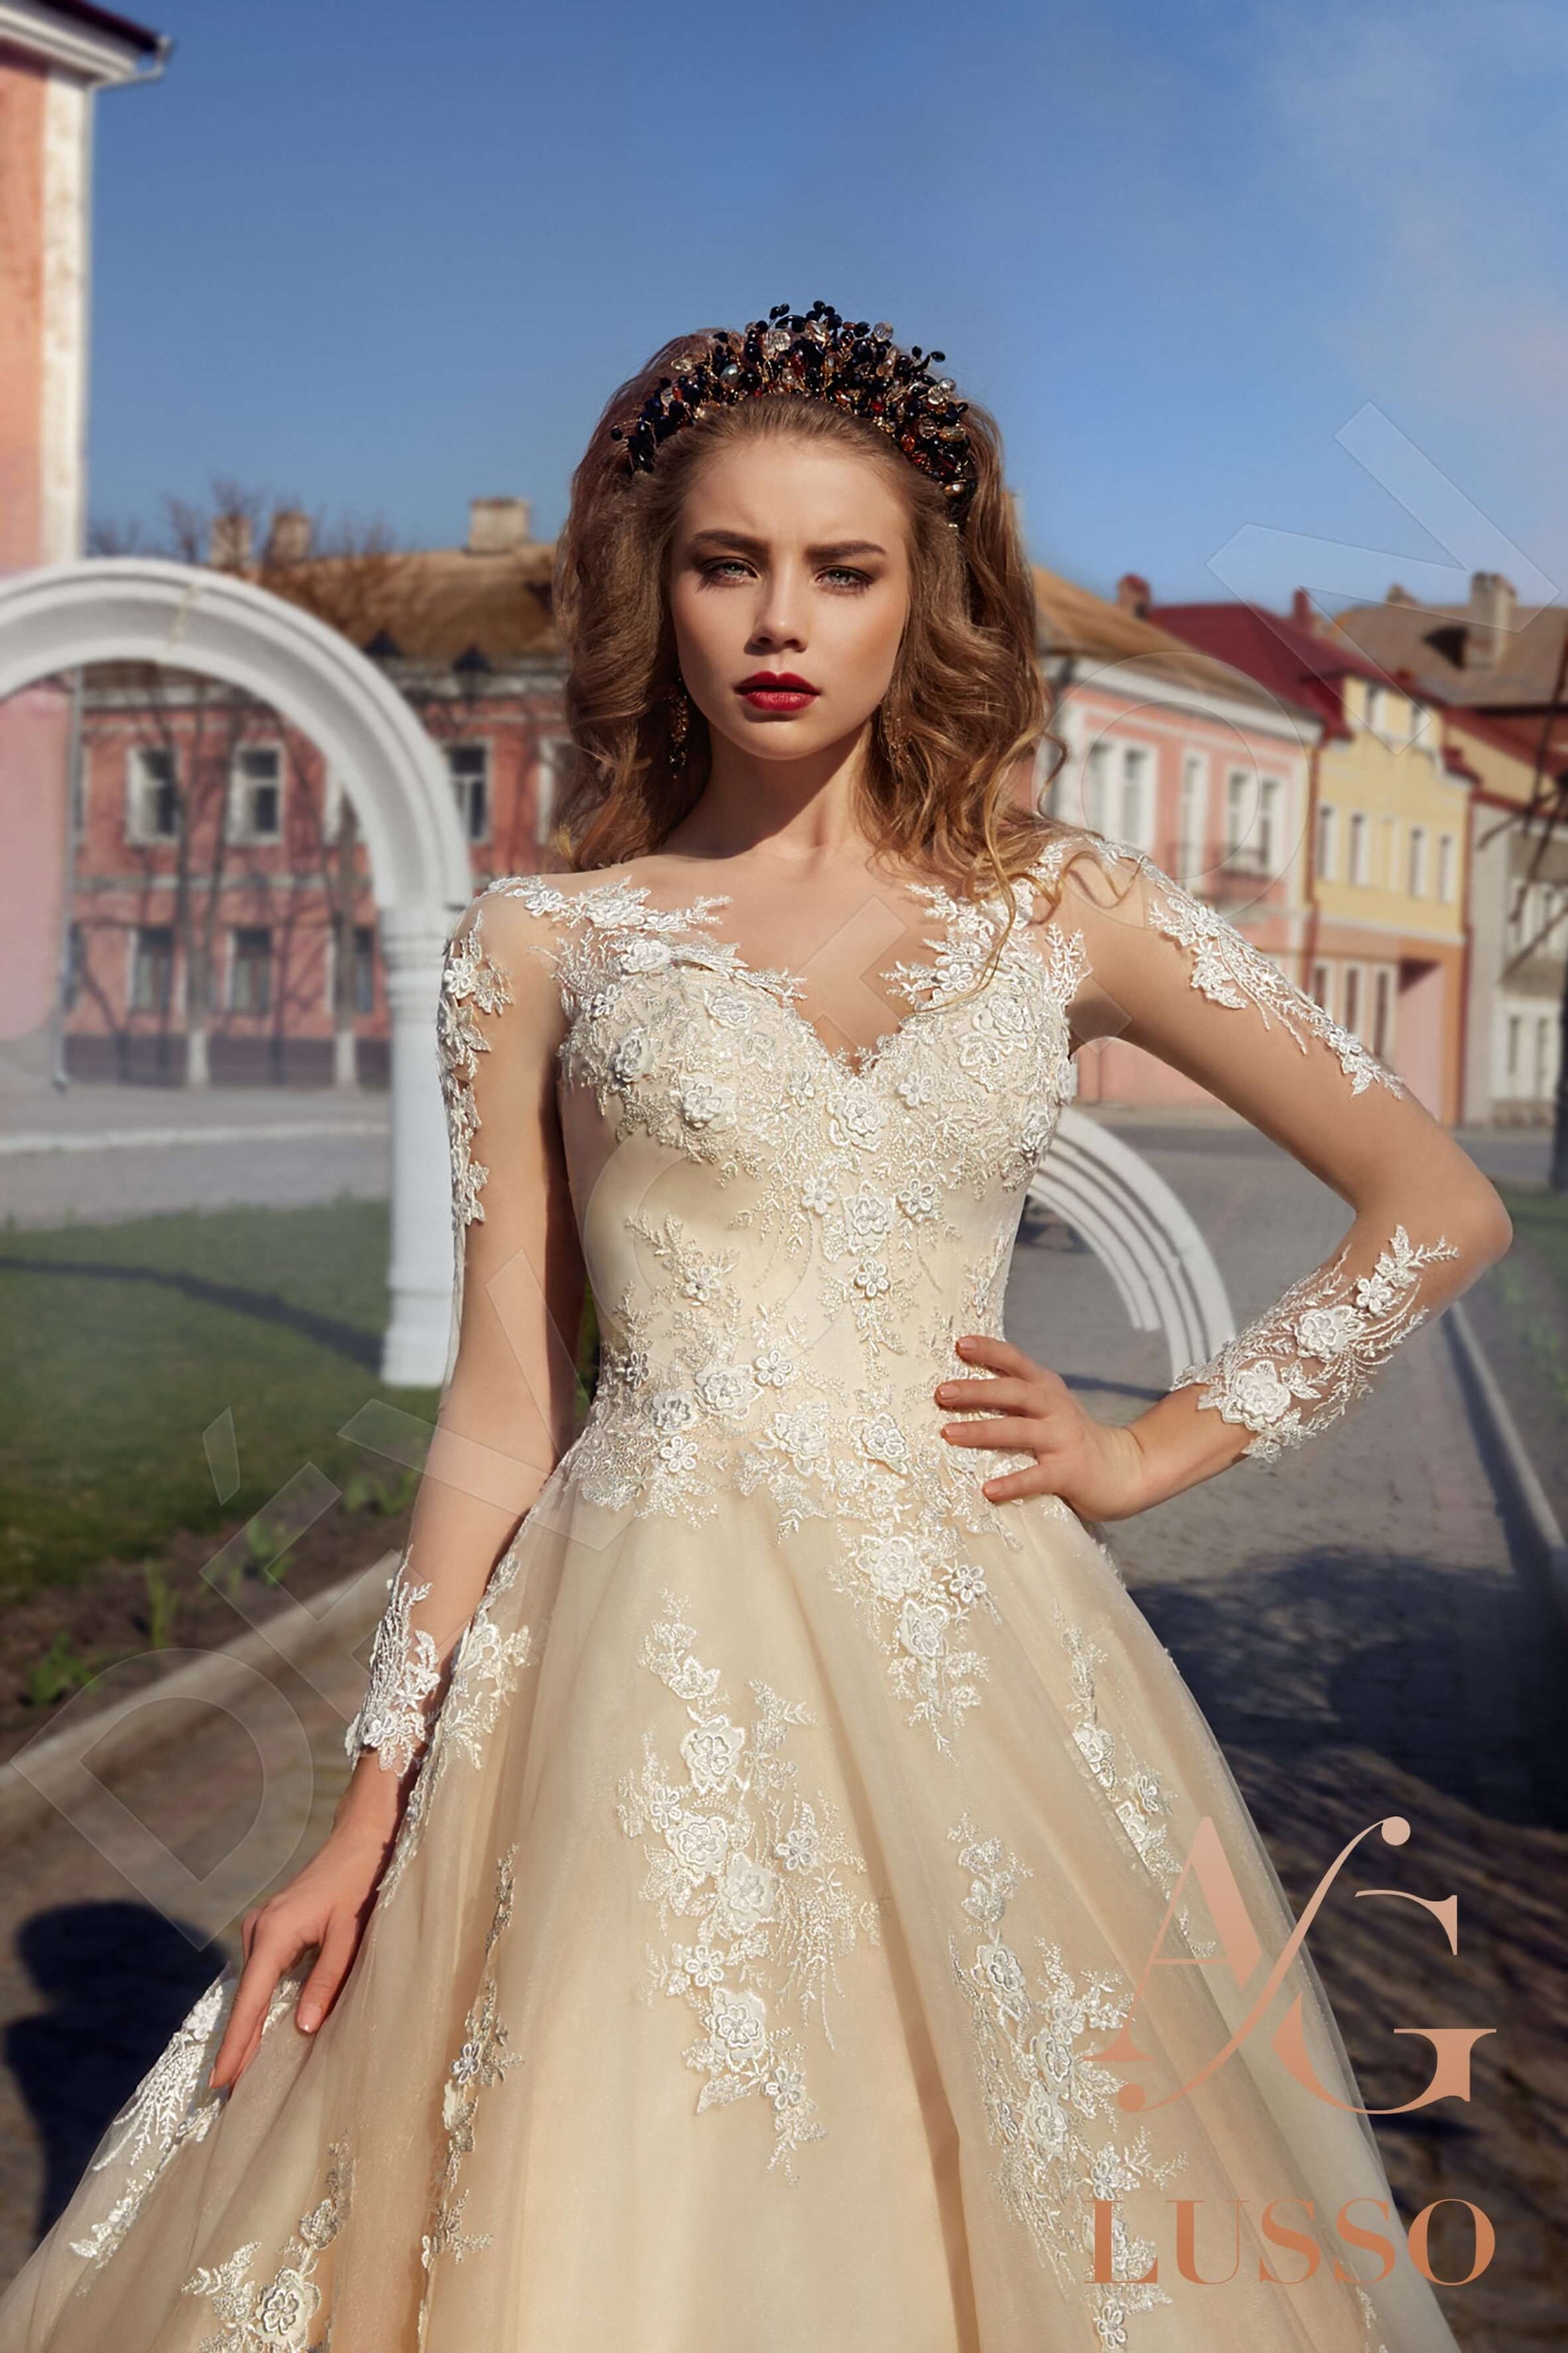 Imelly Princess/Ball Gown Illusion Nude Wedding dress